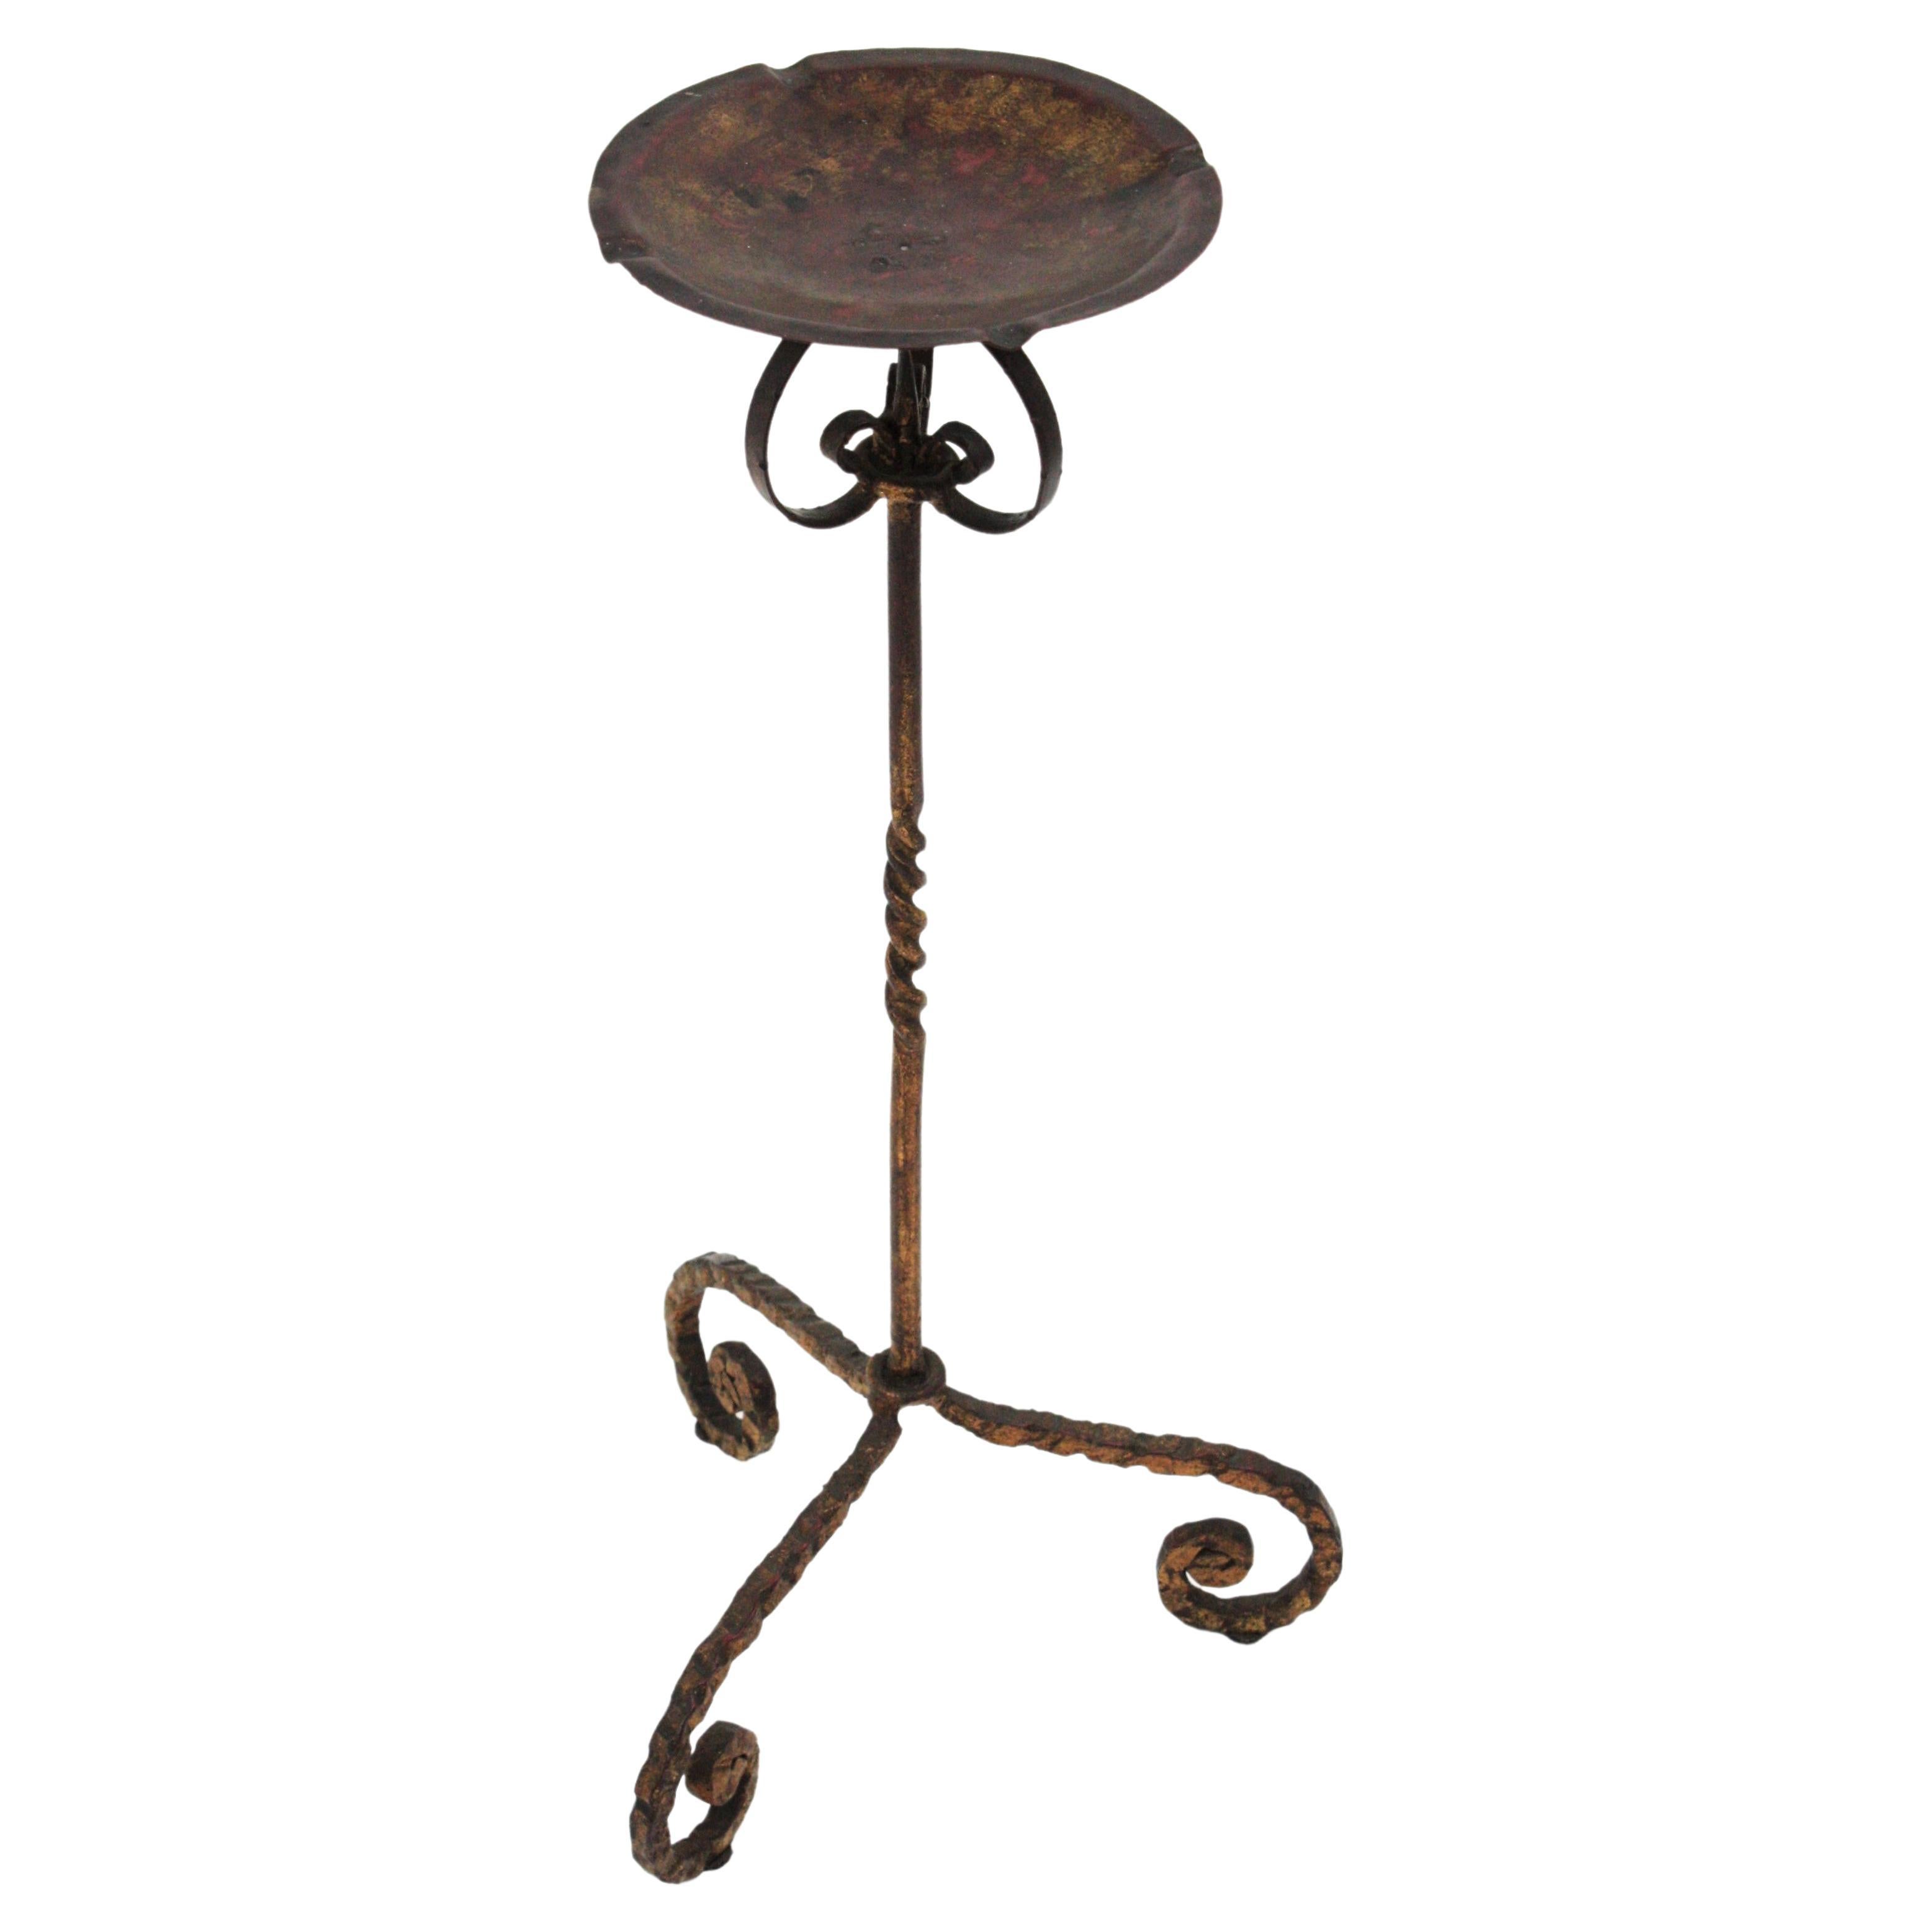 Spanish Drinks Table / Side Table / Floor Ashtray, Wrought Iron, 1940s